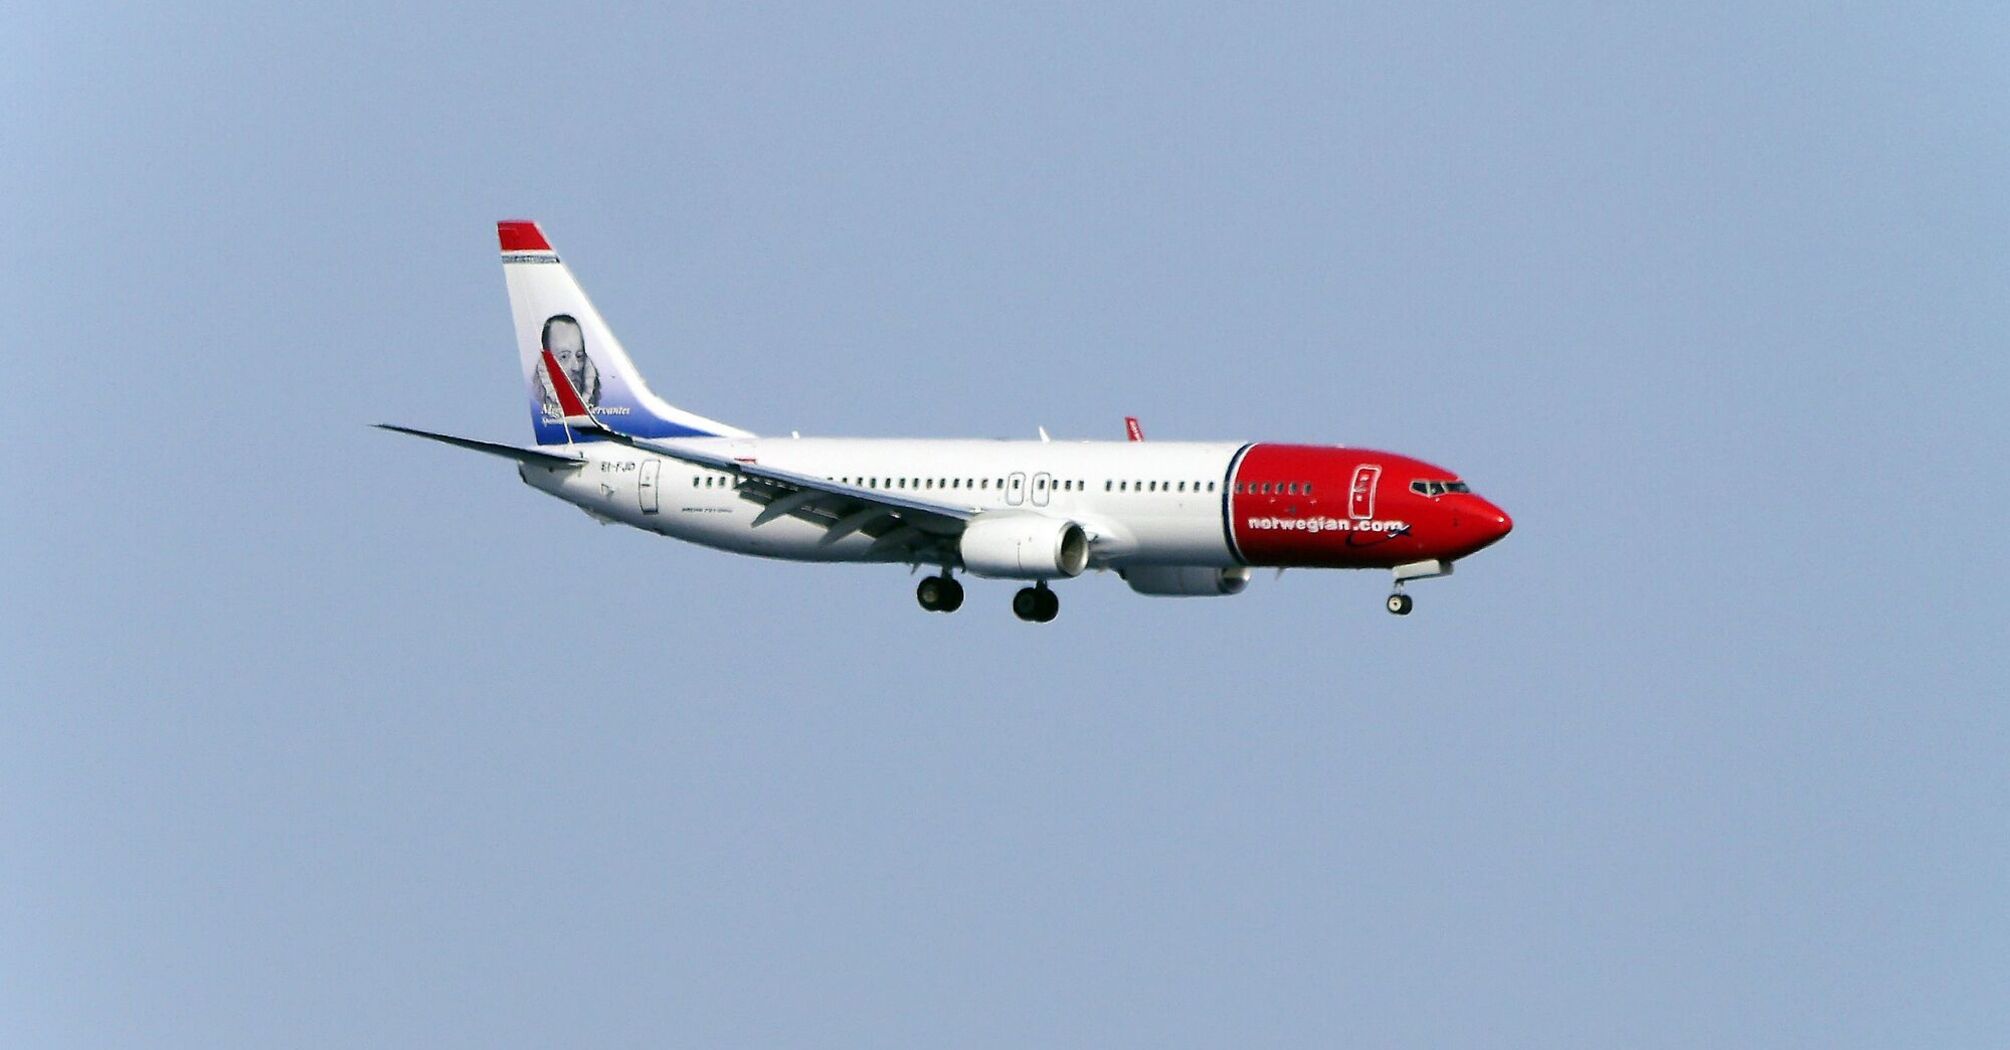 Norwegian Airline plane flying in the air